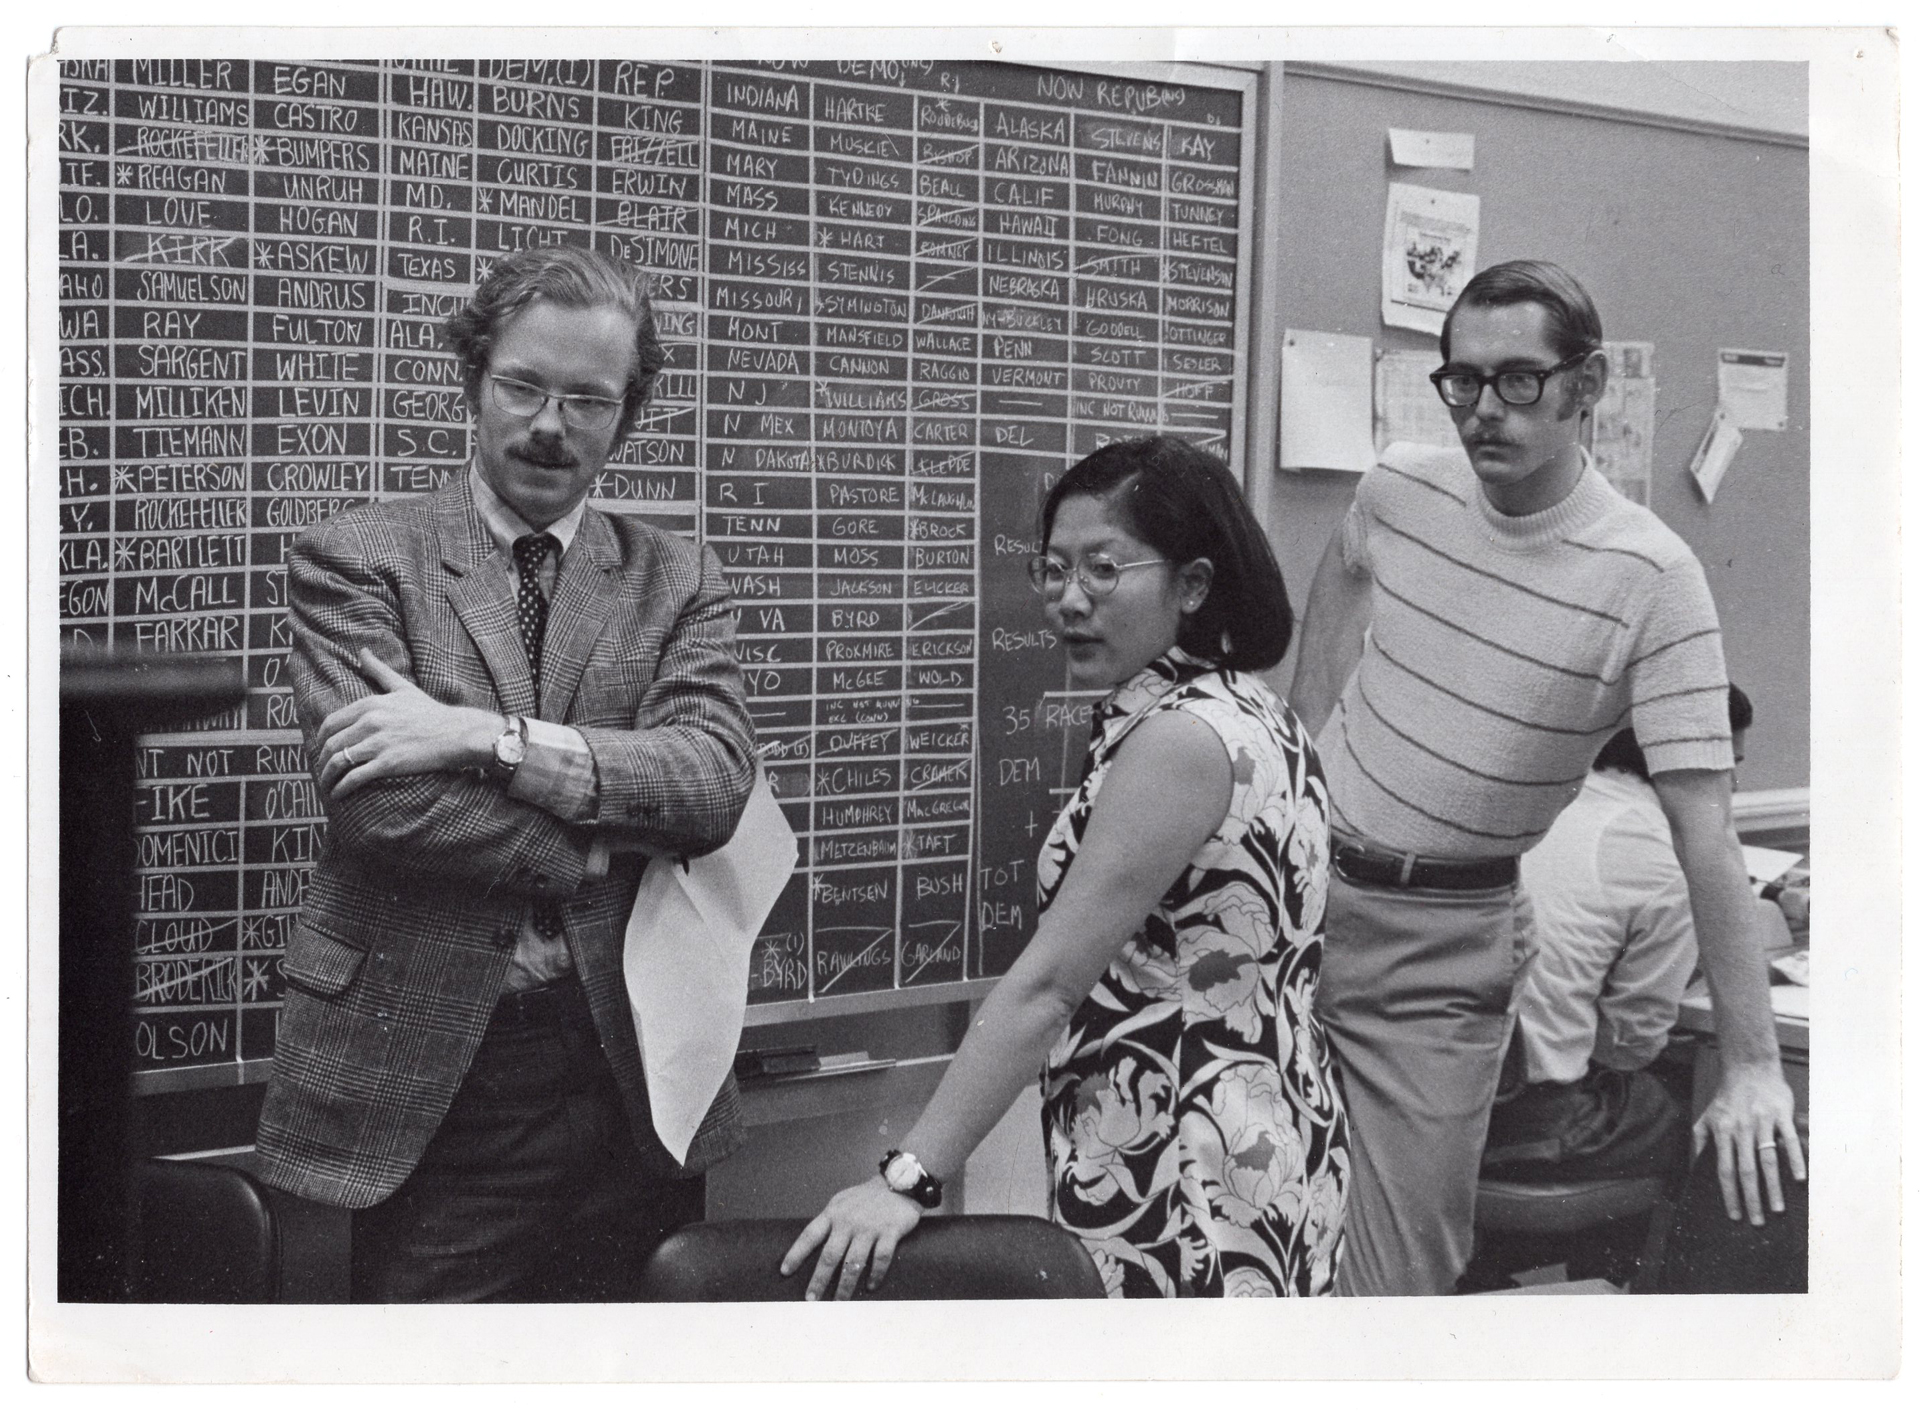 Black-and-white photo of two men and one Asian woman in front of blackboard covered in names